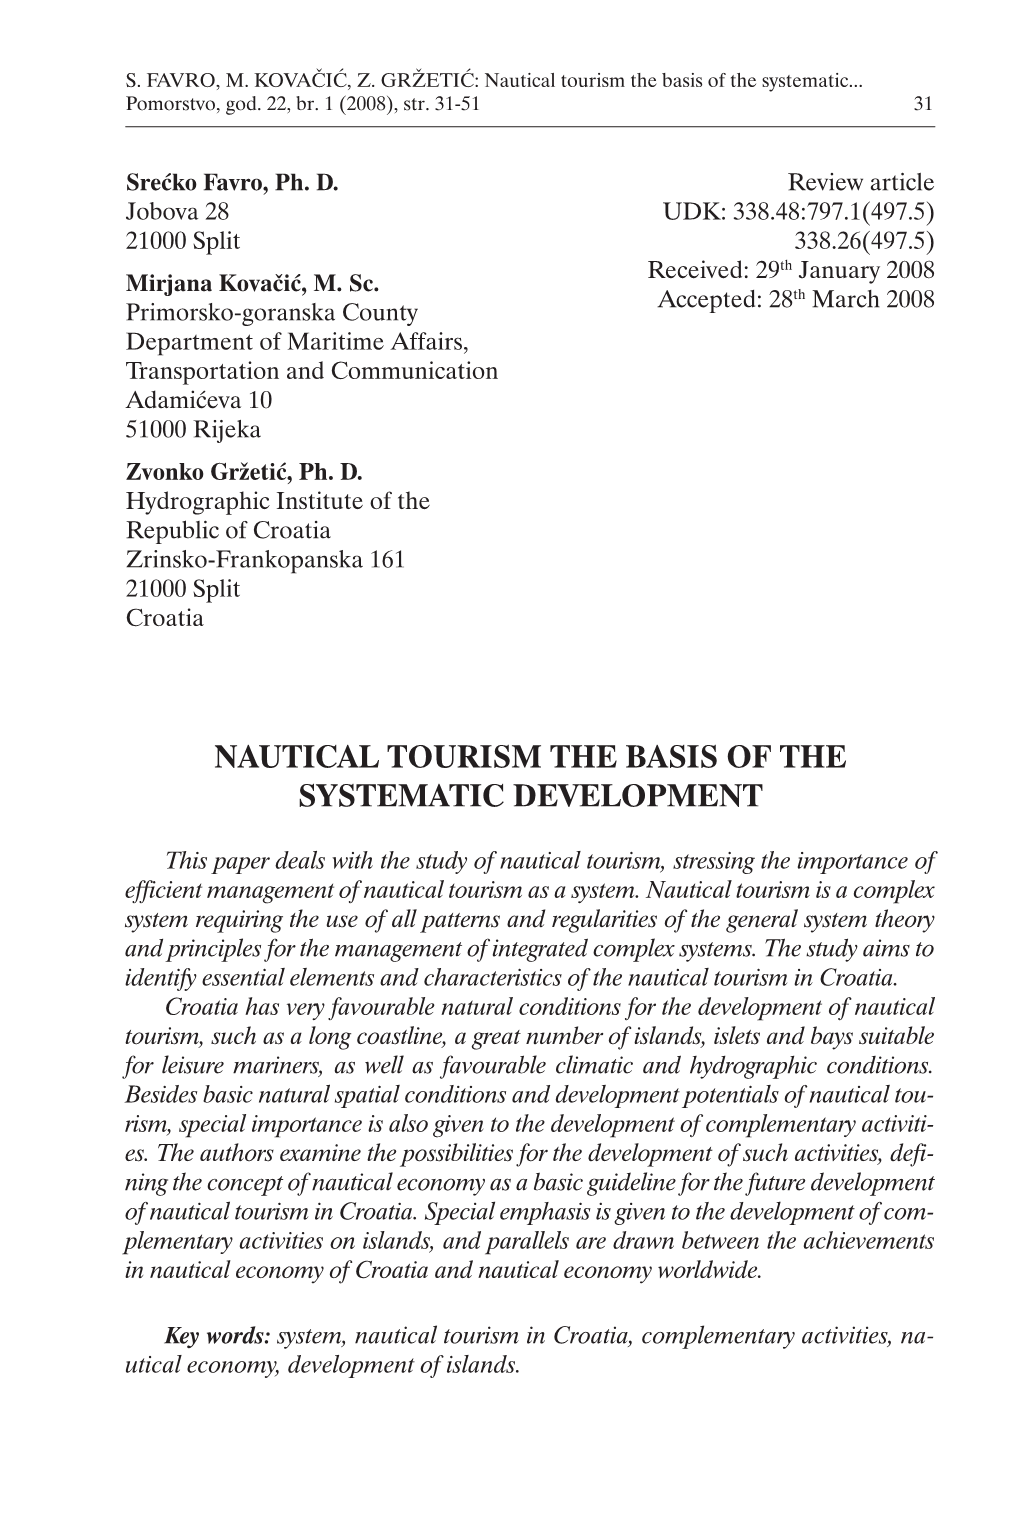 Nautical Tourism the Basis of the Systematic Development